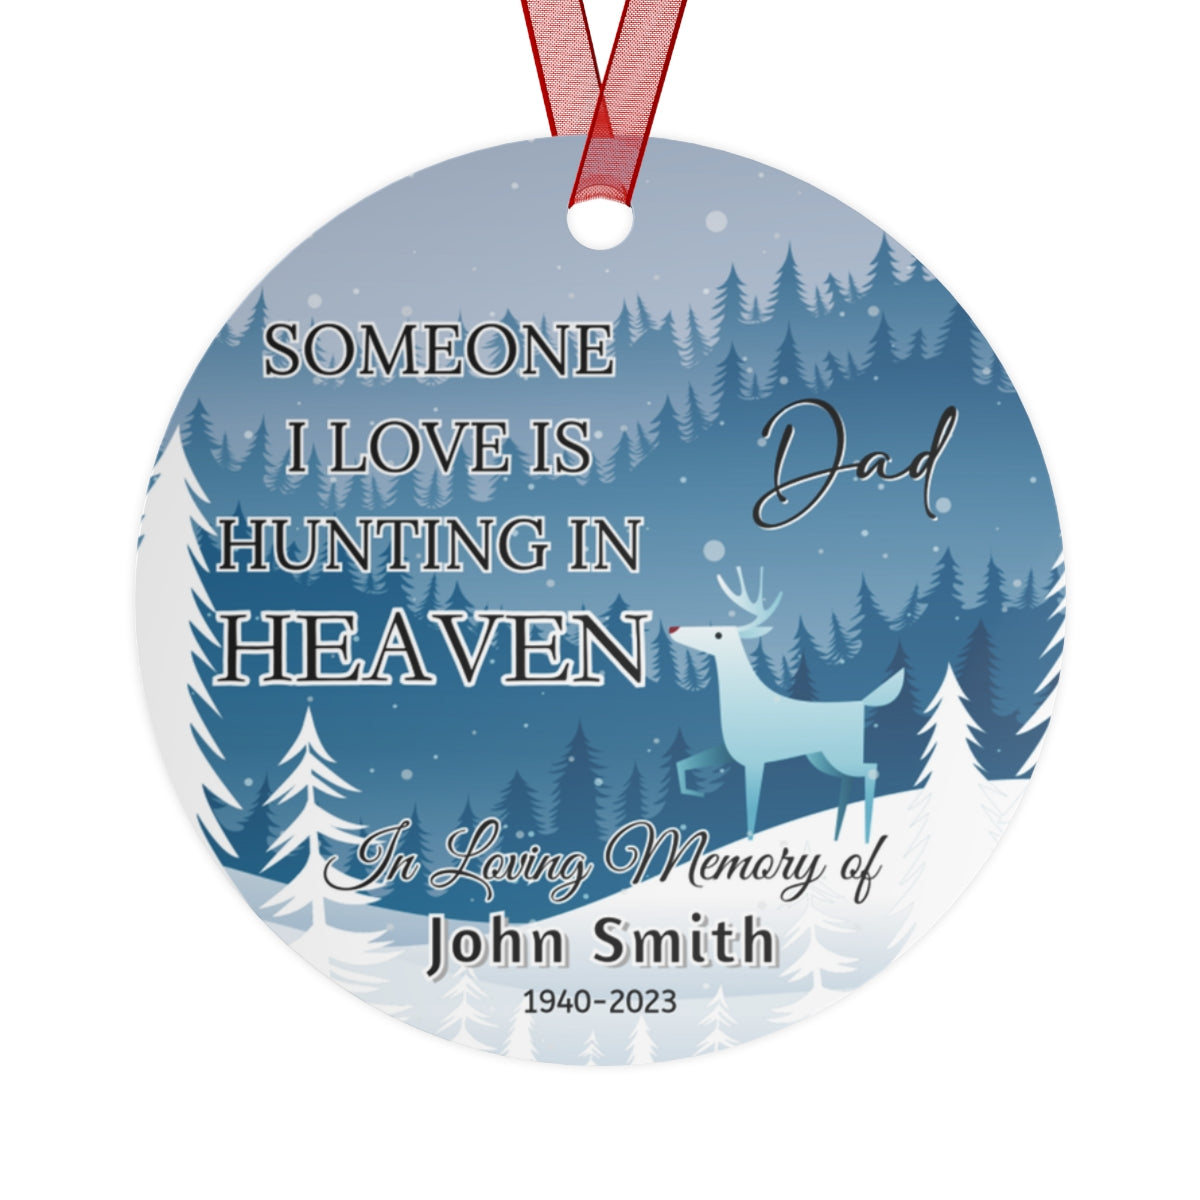 Dad Remembrance Ornament Gift